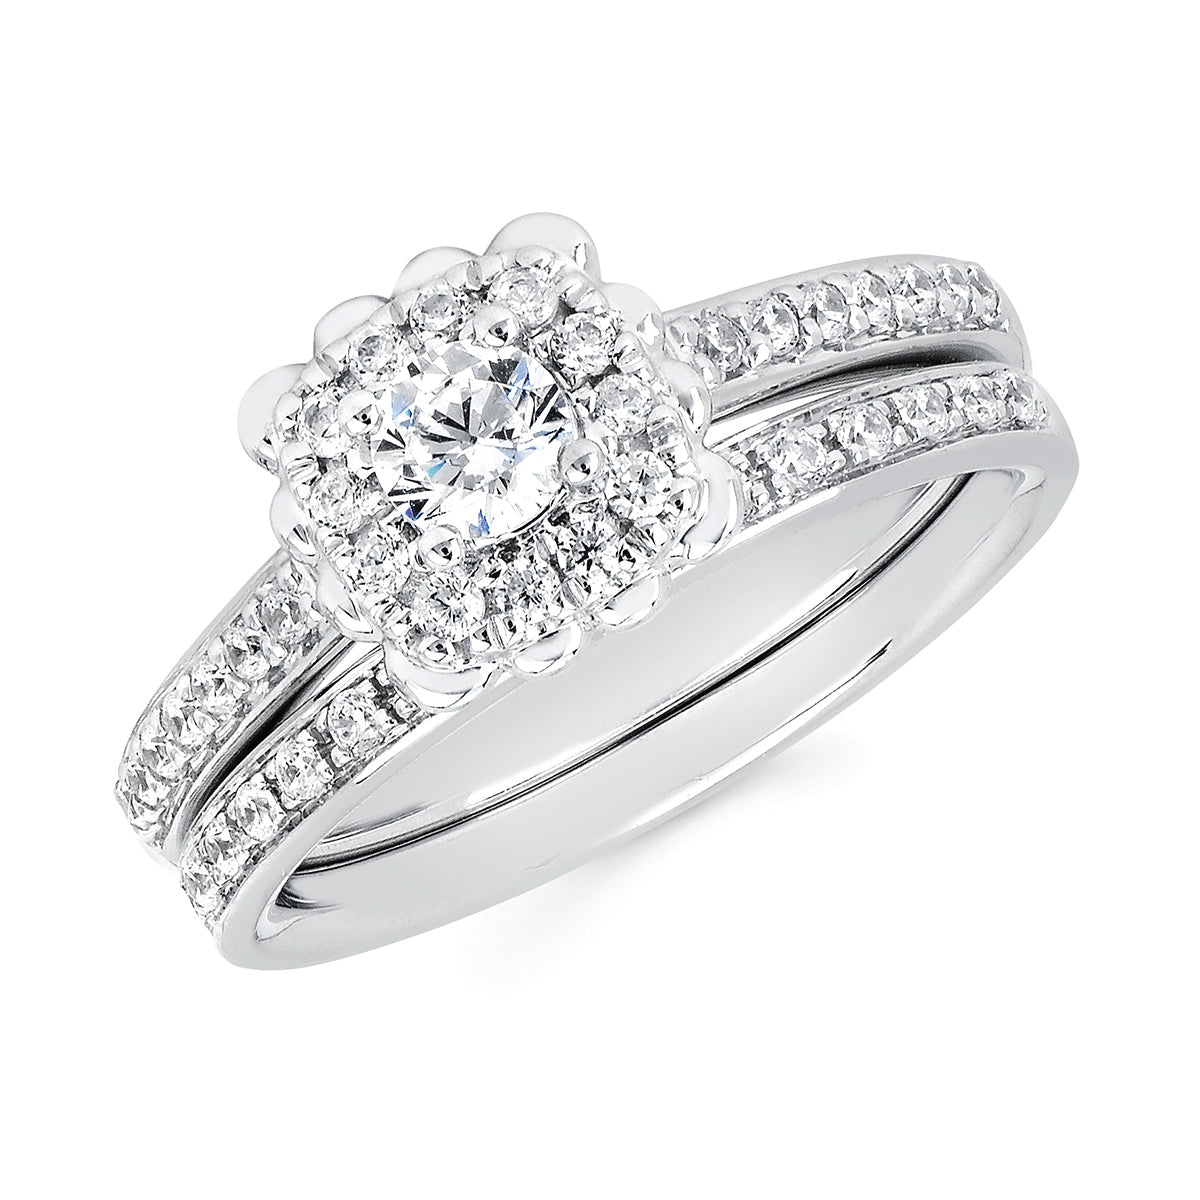 Halo Bridal: 1/4 Ctw. Diamond Halo Semi Mount available for 1/4 Ct. Round Center Diamond in 14K Gold